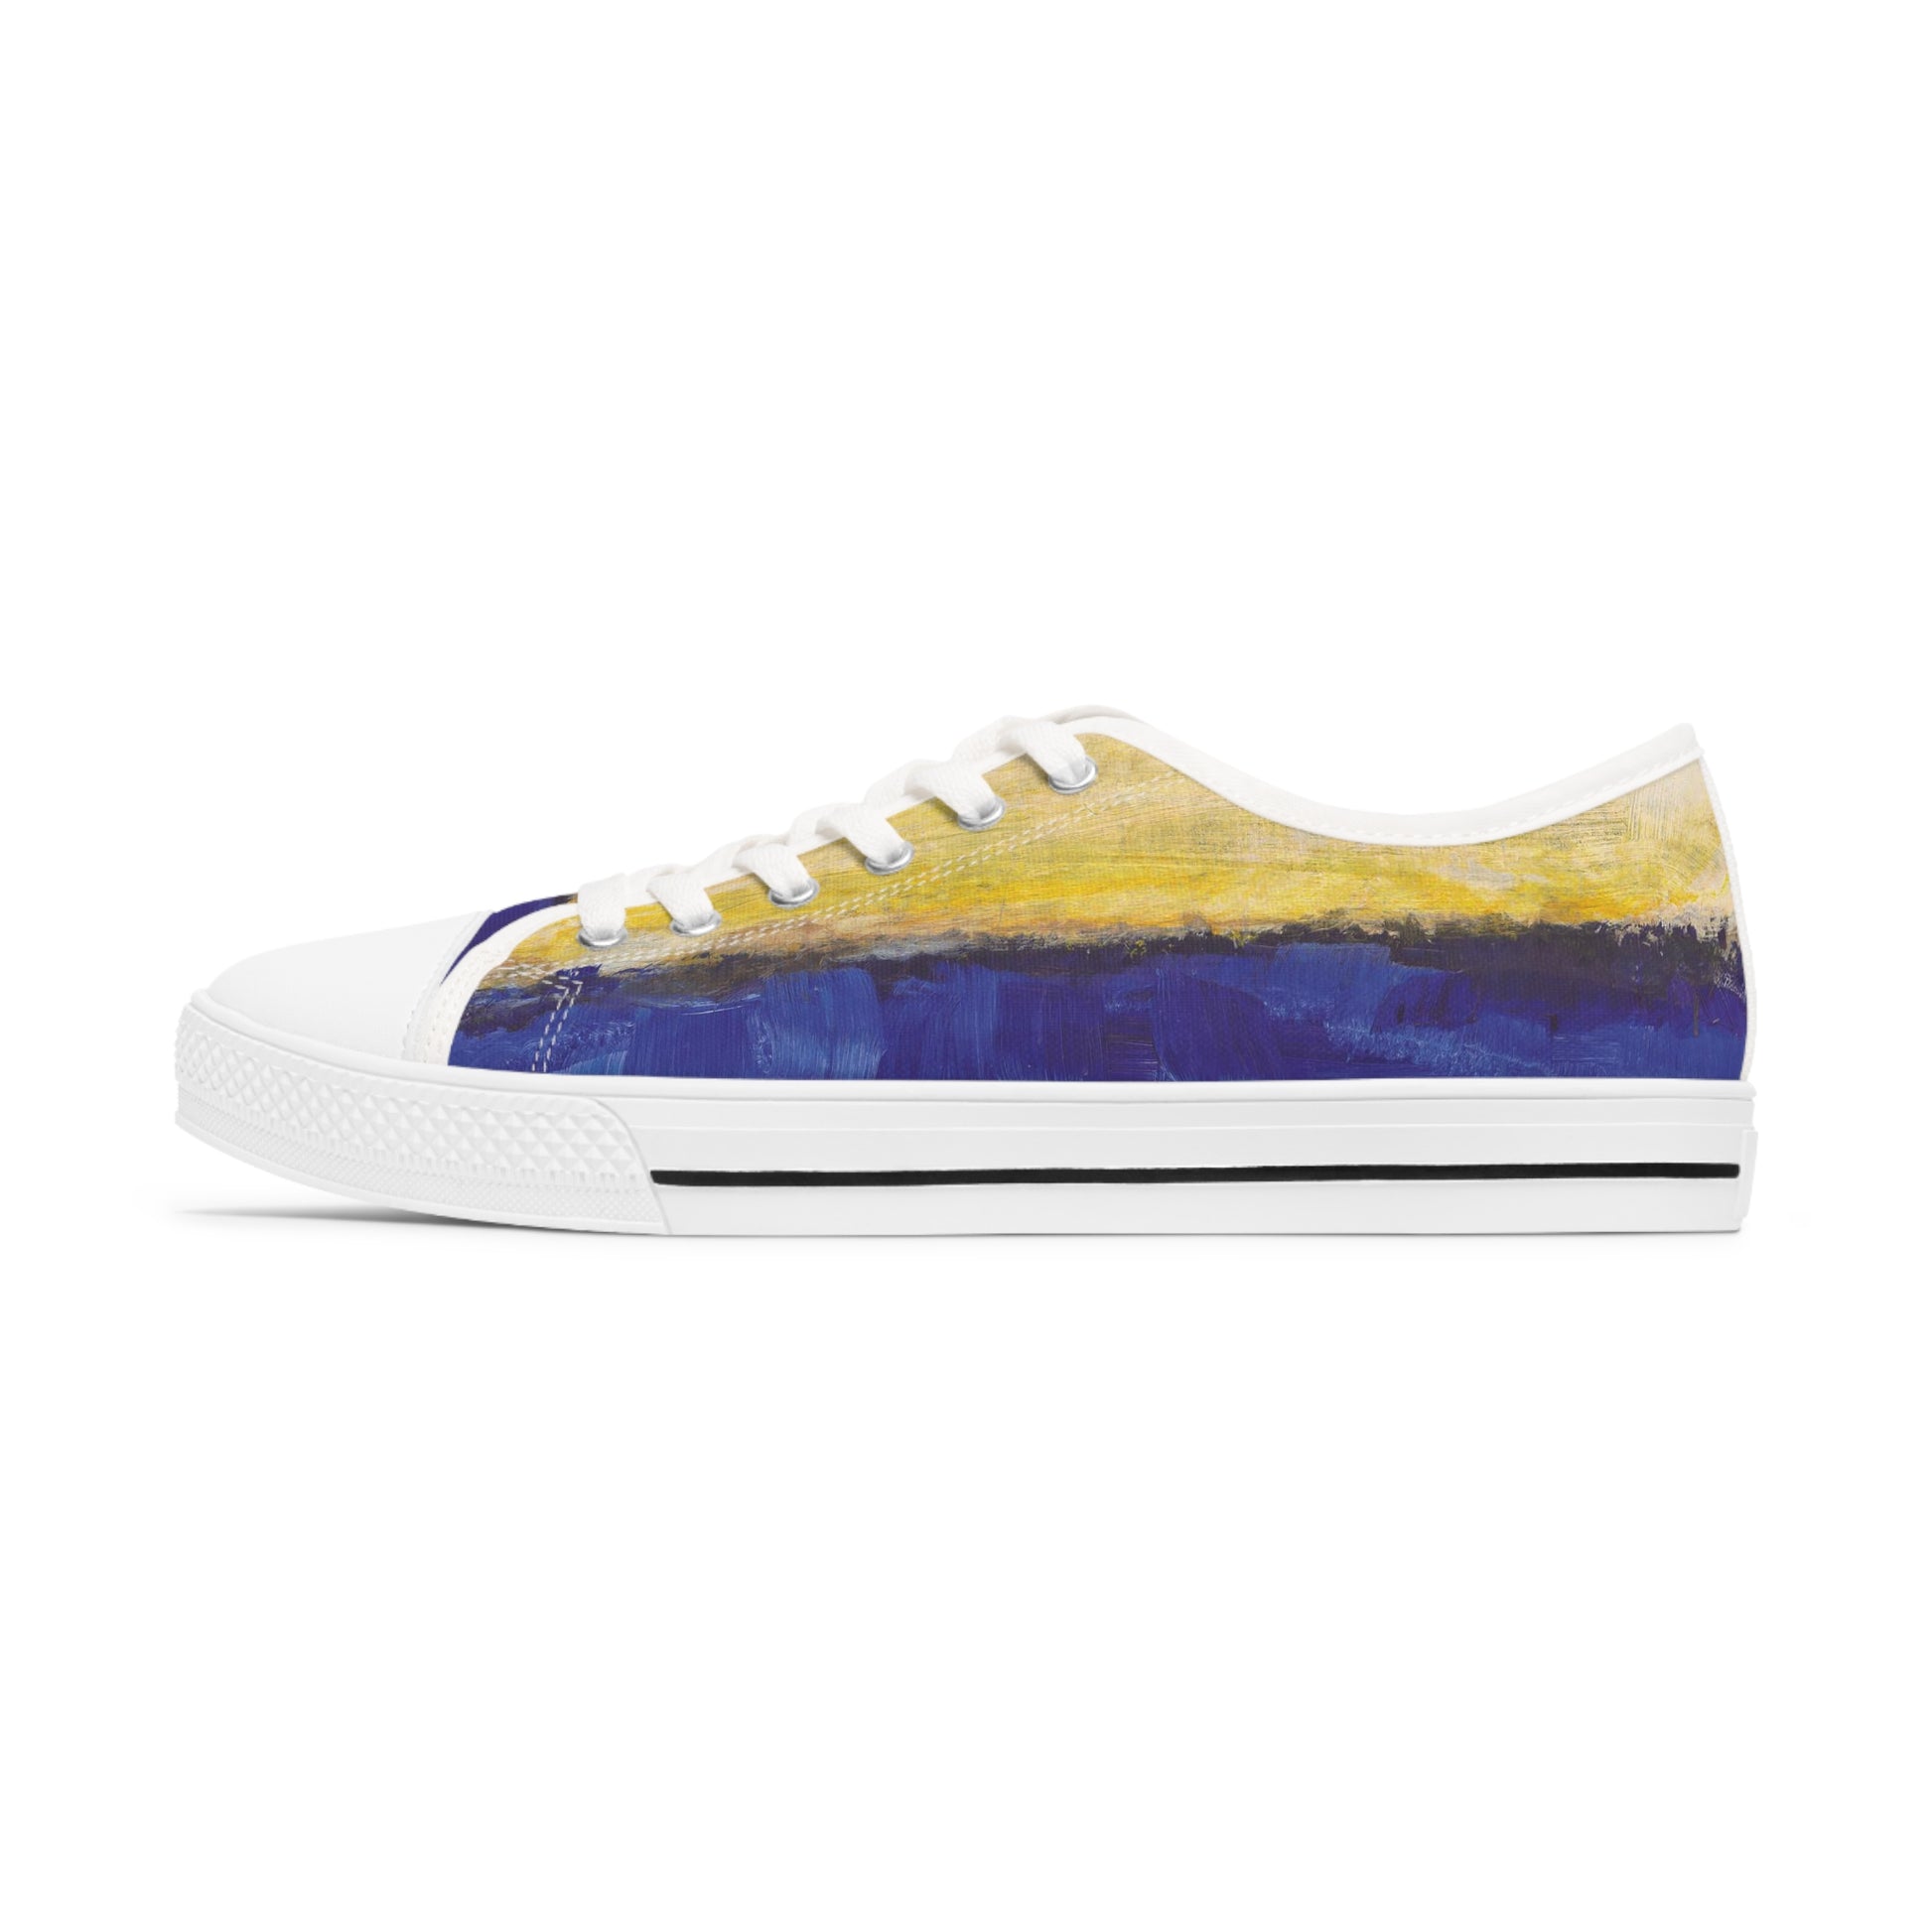 MARK ROTHKO - ABSTRACT - LOW TOP ART SNEAKERS FOR HER